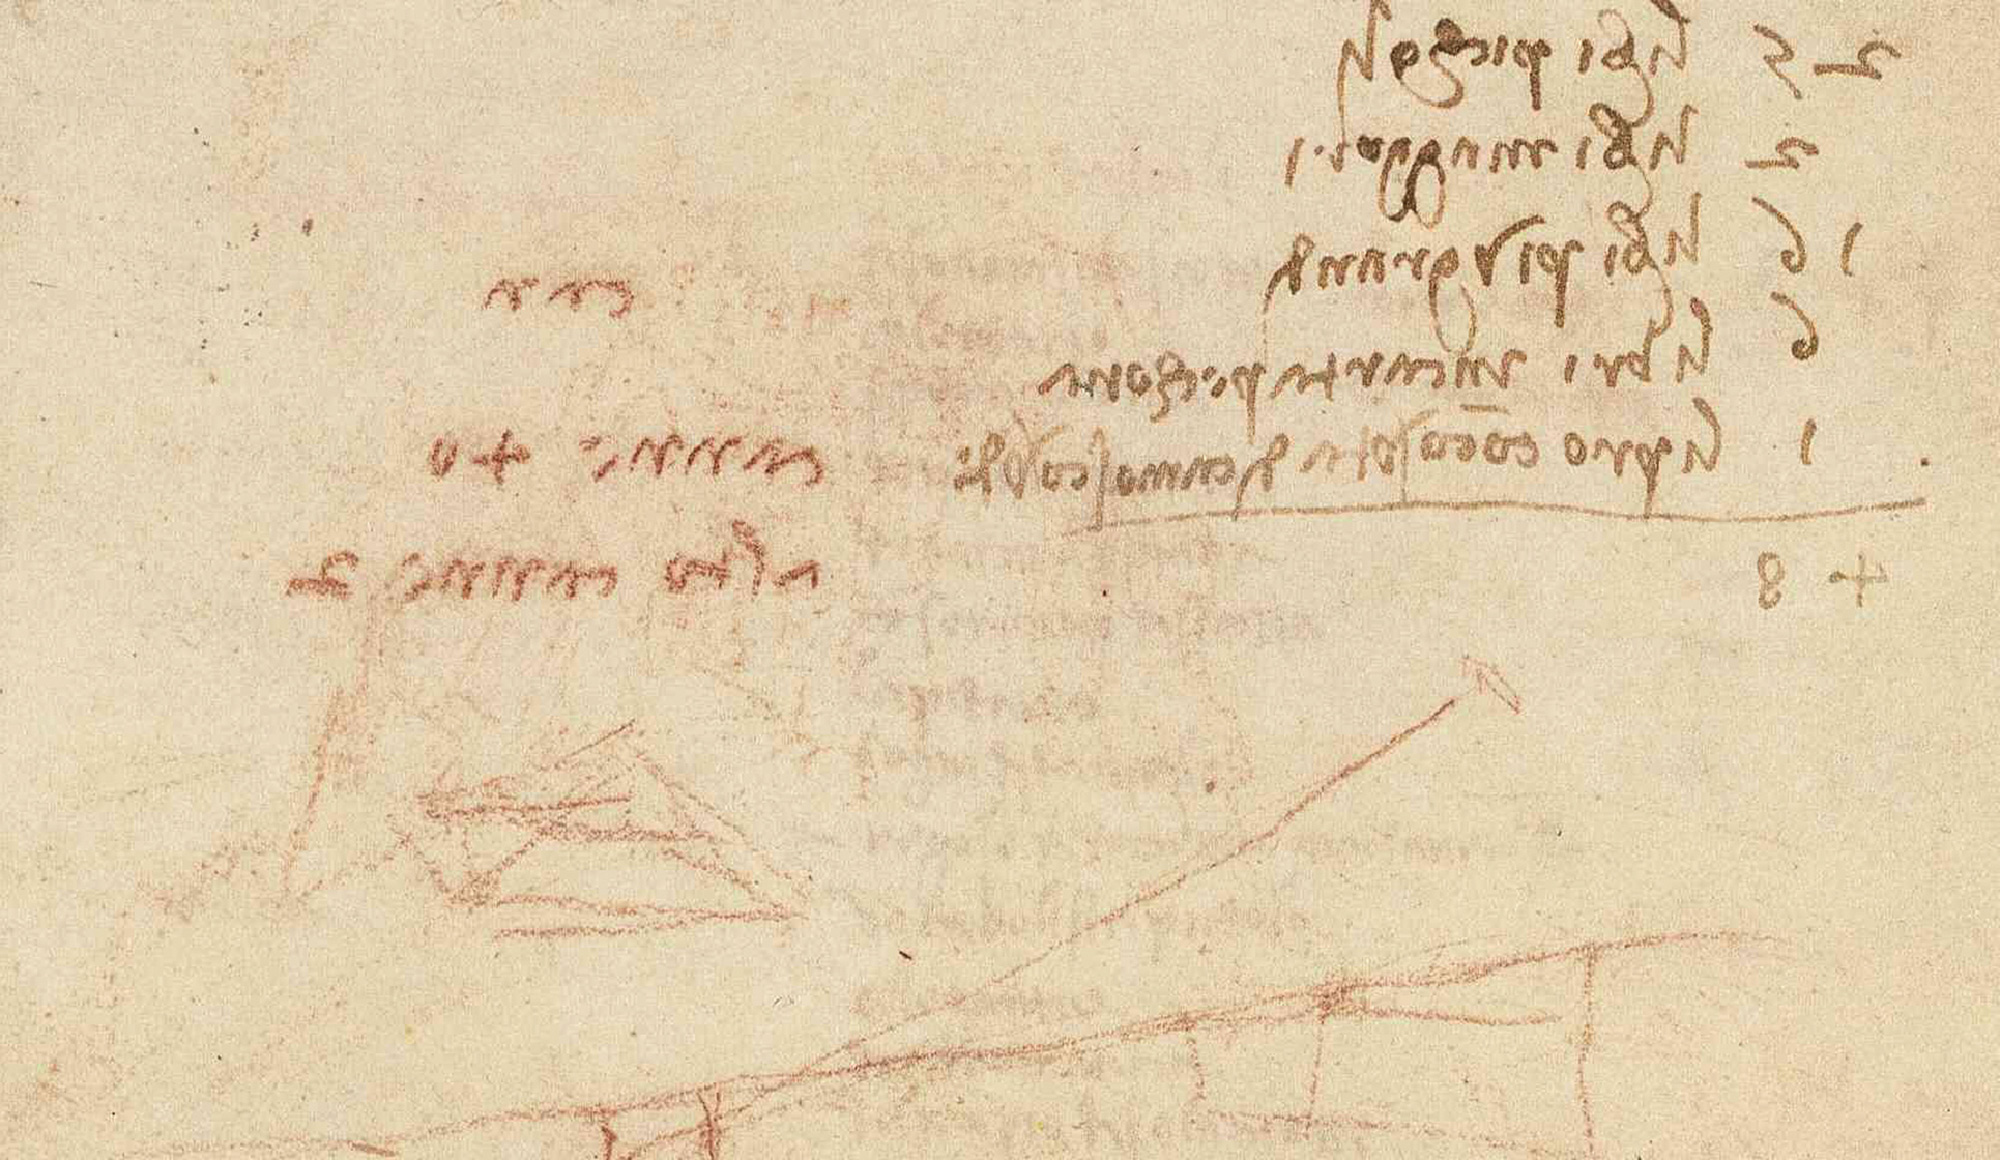 The maestro miscalculates. In the Codex Madrid II (folio 3v) in Spain’s Biblioteca Nacional, Leonardo lists fifty volumes (“25 small books; 2 larger books; 16 rather larger books; 6 books on vellum; 1 book bound in green chamois”) but adds them incorrectly to arrive at a total of forty-eight. These volumes are not considered to be part of his library; many scholars speculate that they are his own notebooks and collections of drawings.